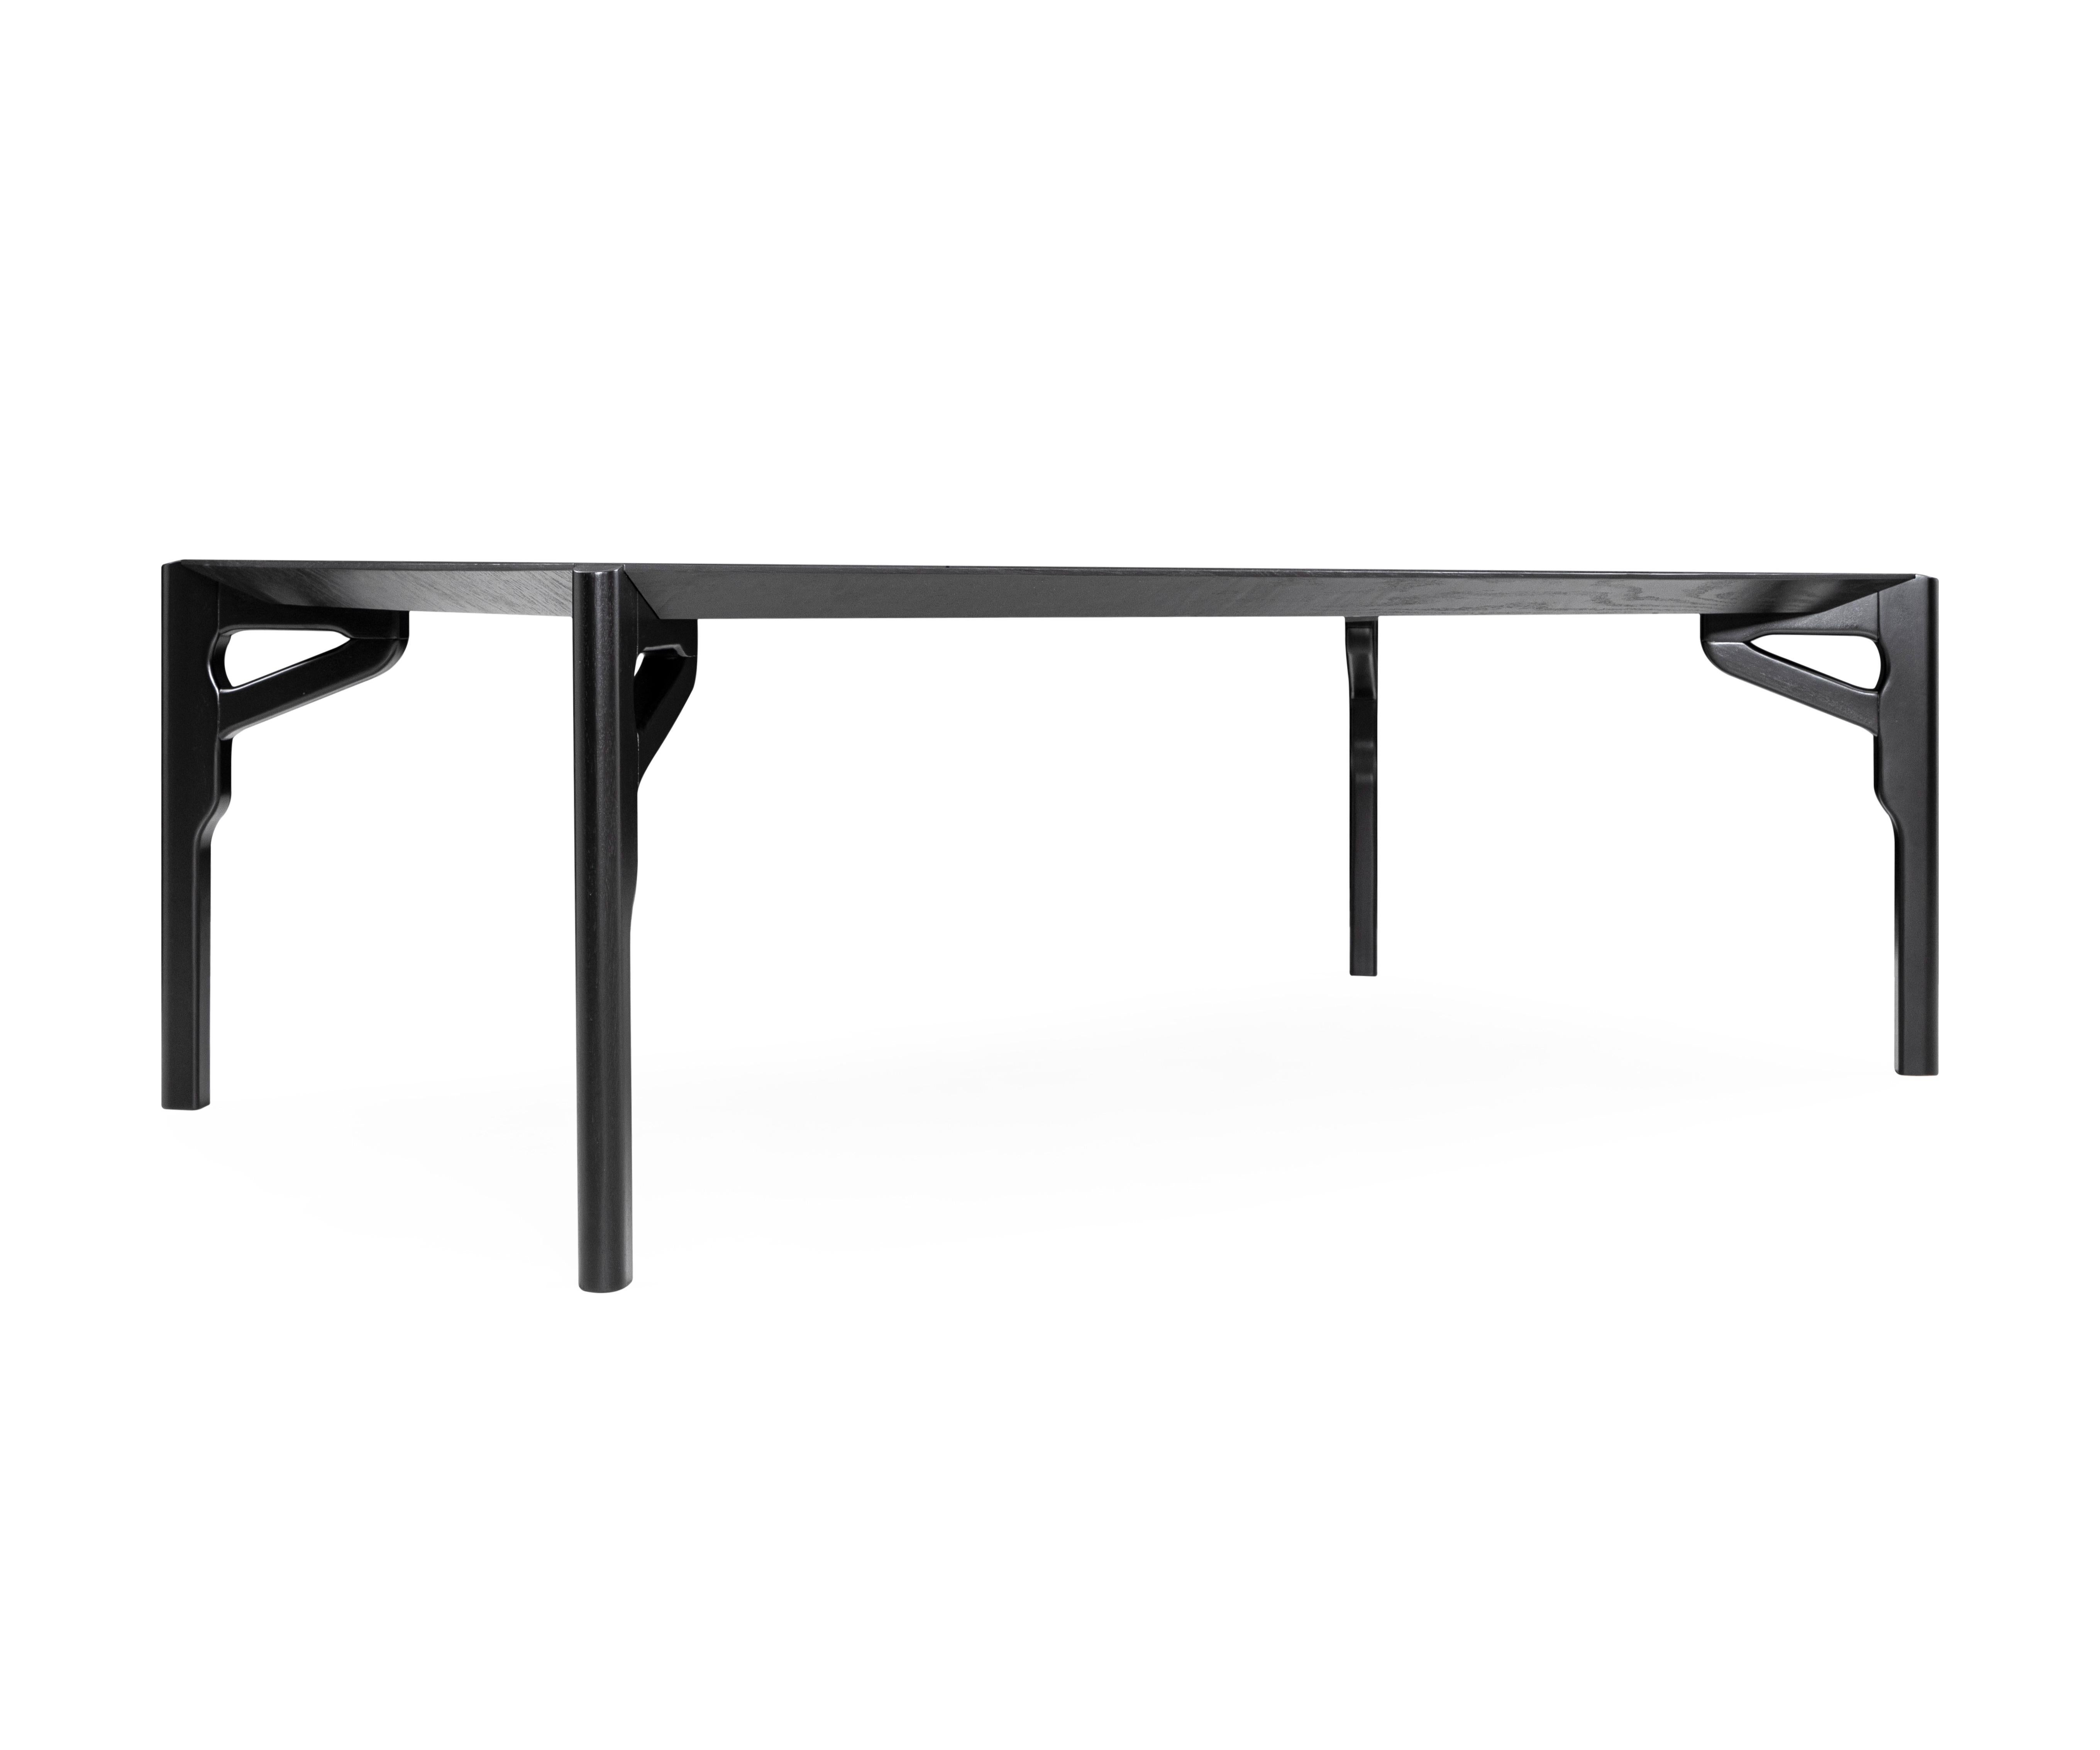 The Hawk dining table has been designed by our Uultis Design team with a black finish oak table, the perfect addition to any dining room. It is a sophisticated table for modern contemporary decor, inspired by Brazilian culture. The large tabletop